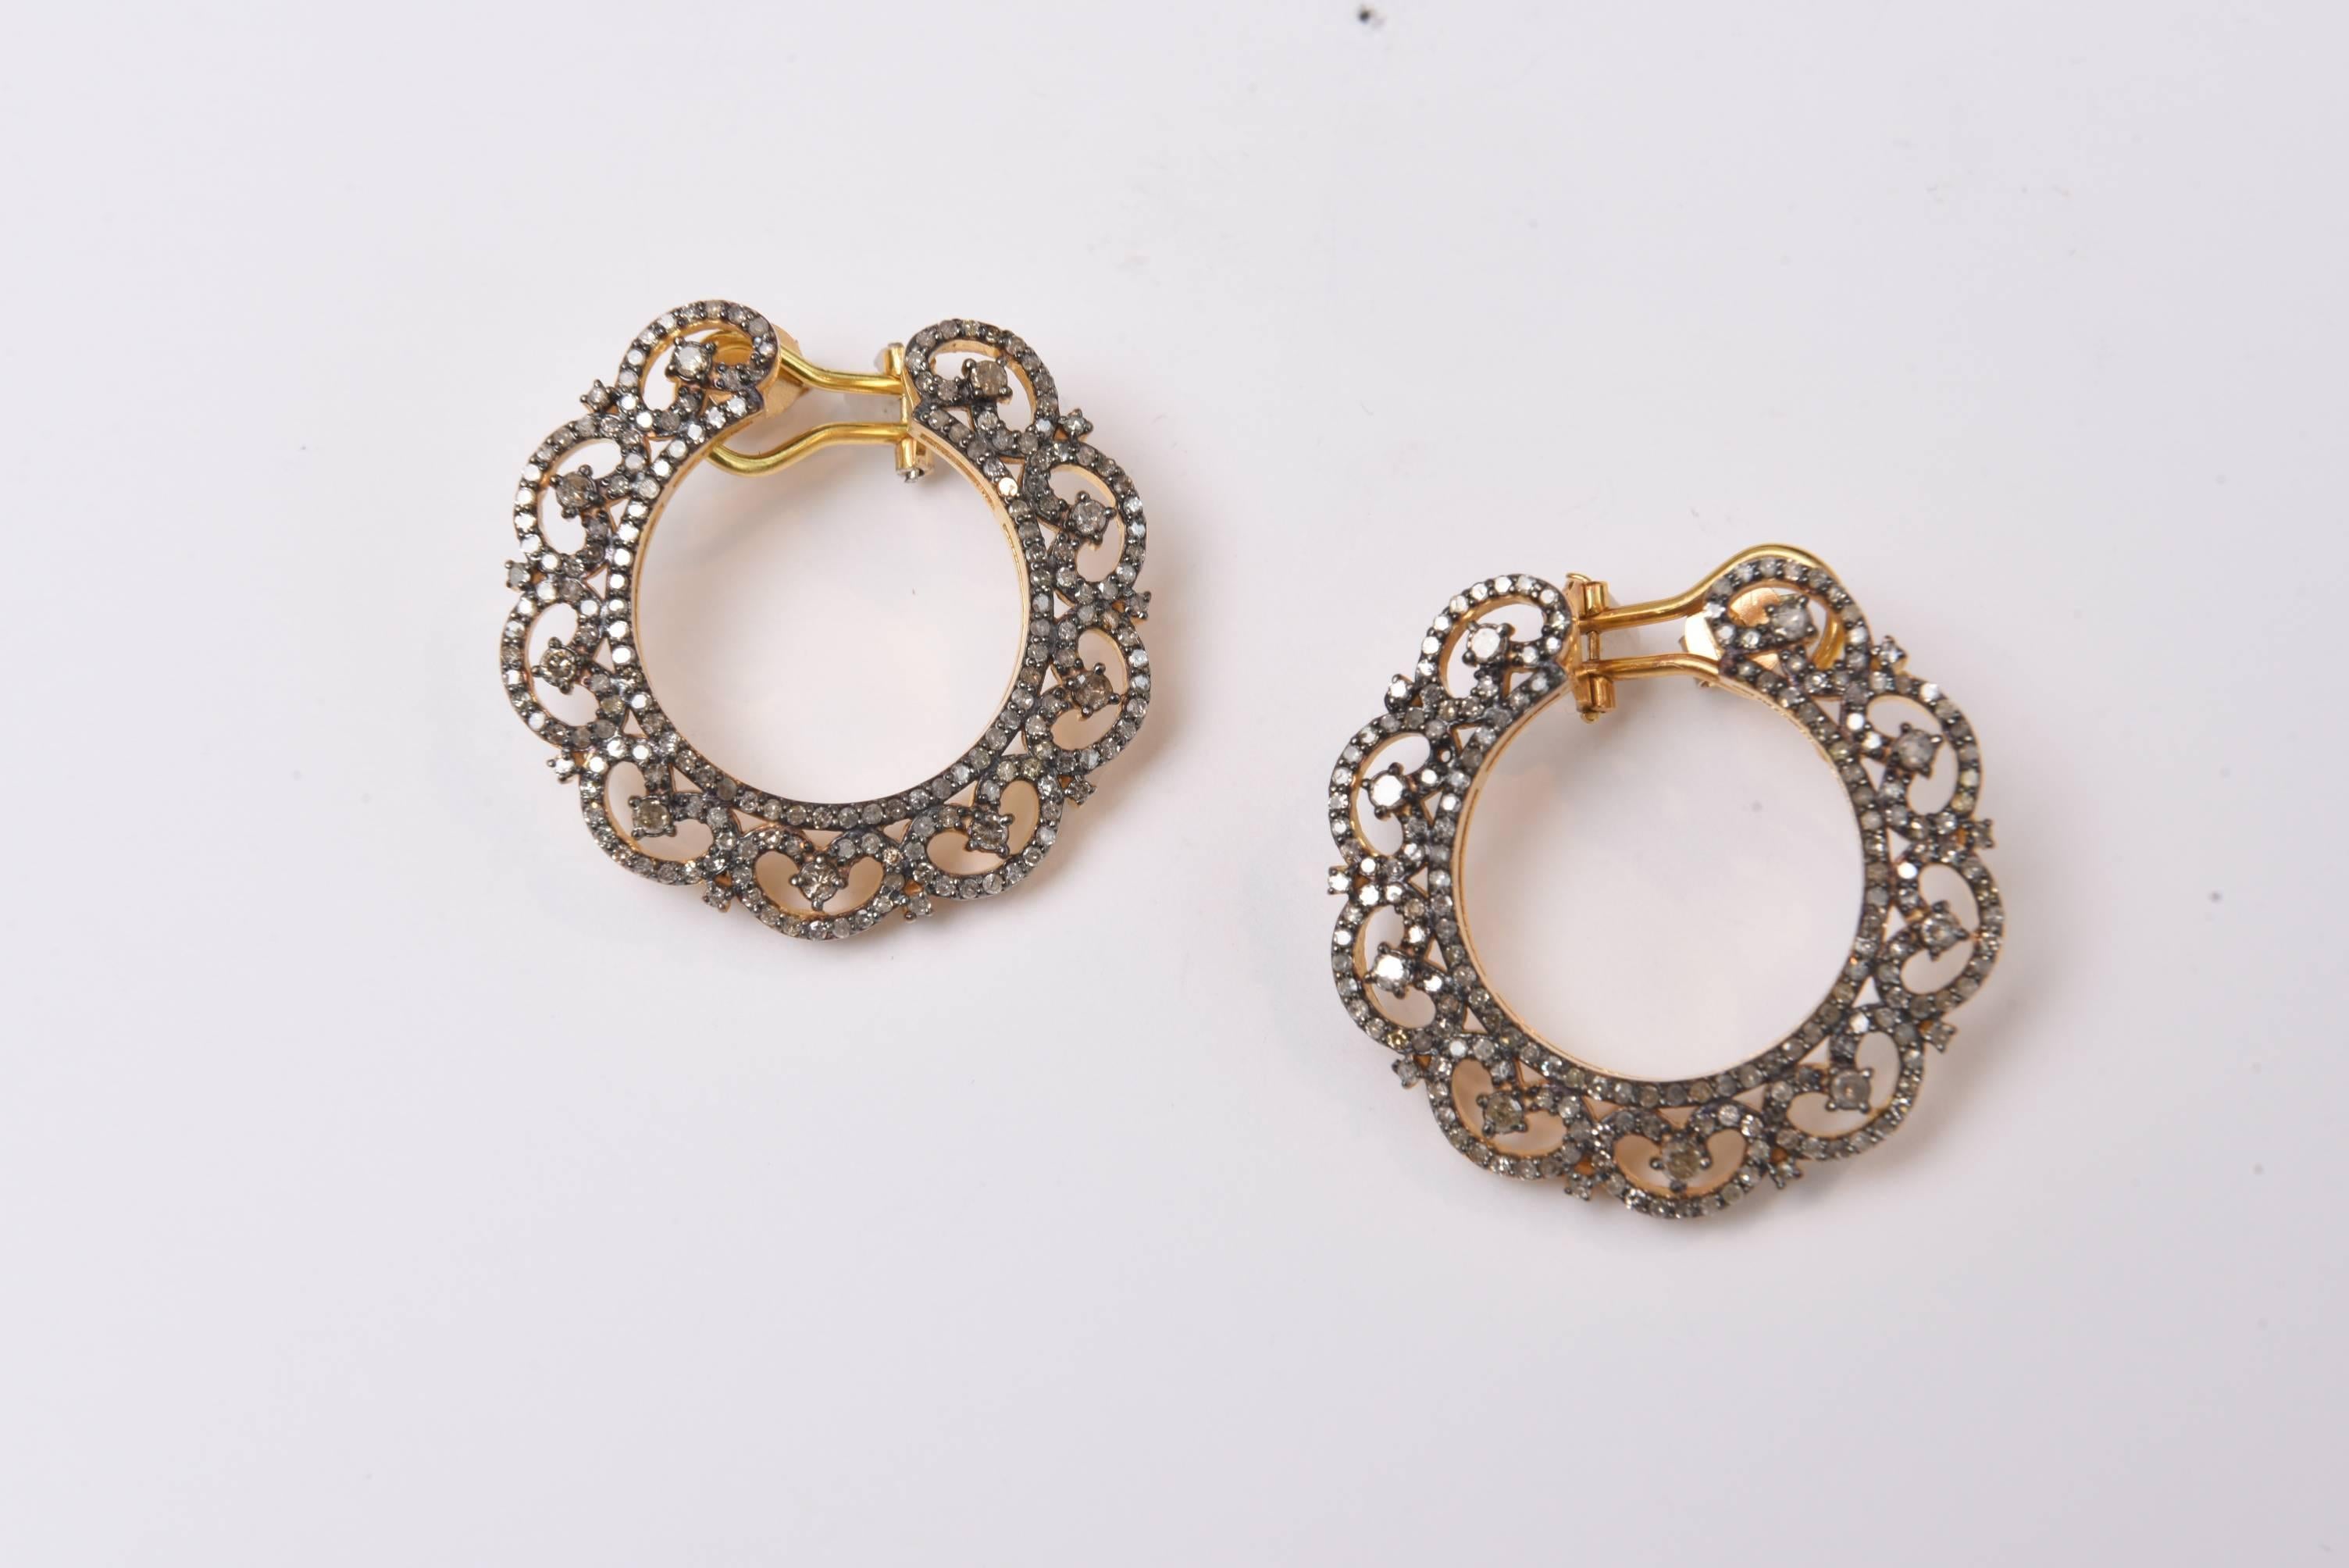 Pair of diamond wreath earrings set in 18K gold over sterling silver.  Omega back is 18K gold for pierced ears.  Carat weight is 2.74.